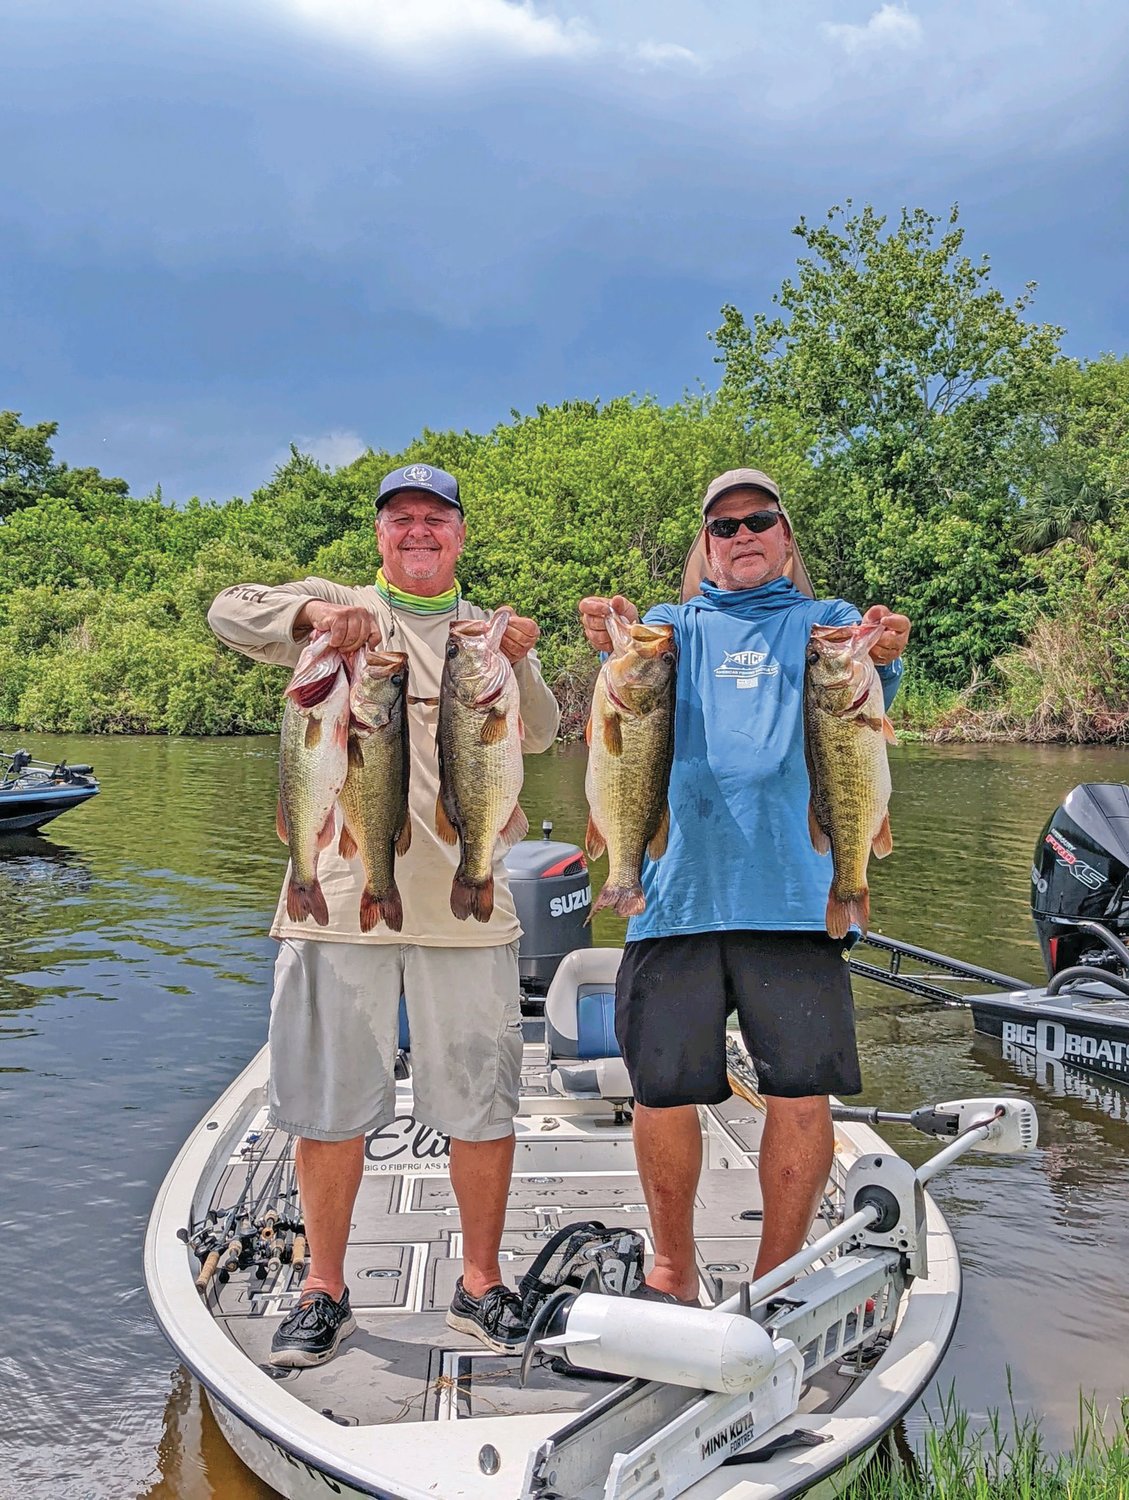 Robert Alfano and Norris Newhouse won first place in the Fast Break Bass Tournament with a five fish limit weighing 29.27 pounds.